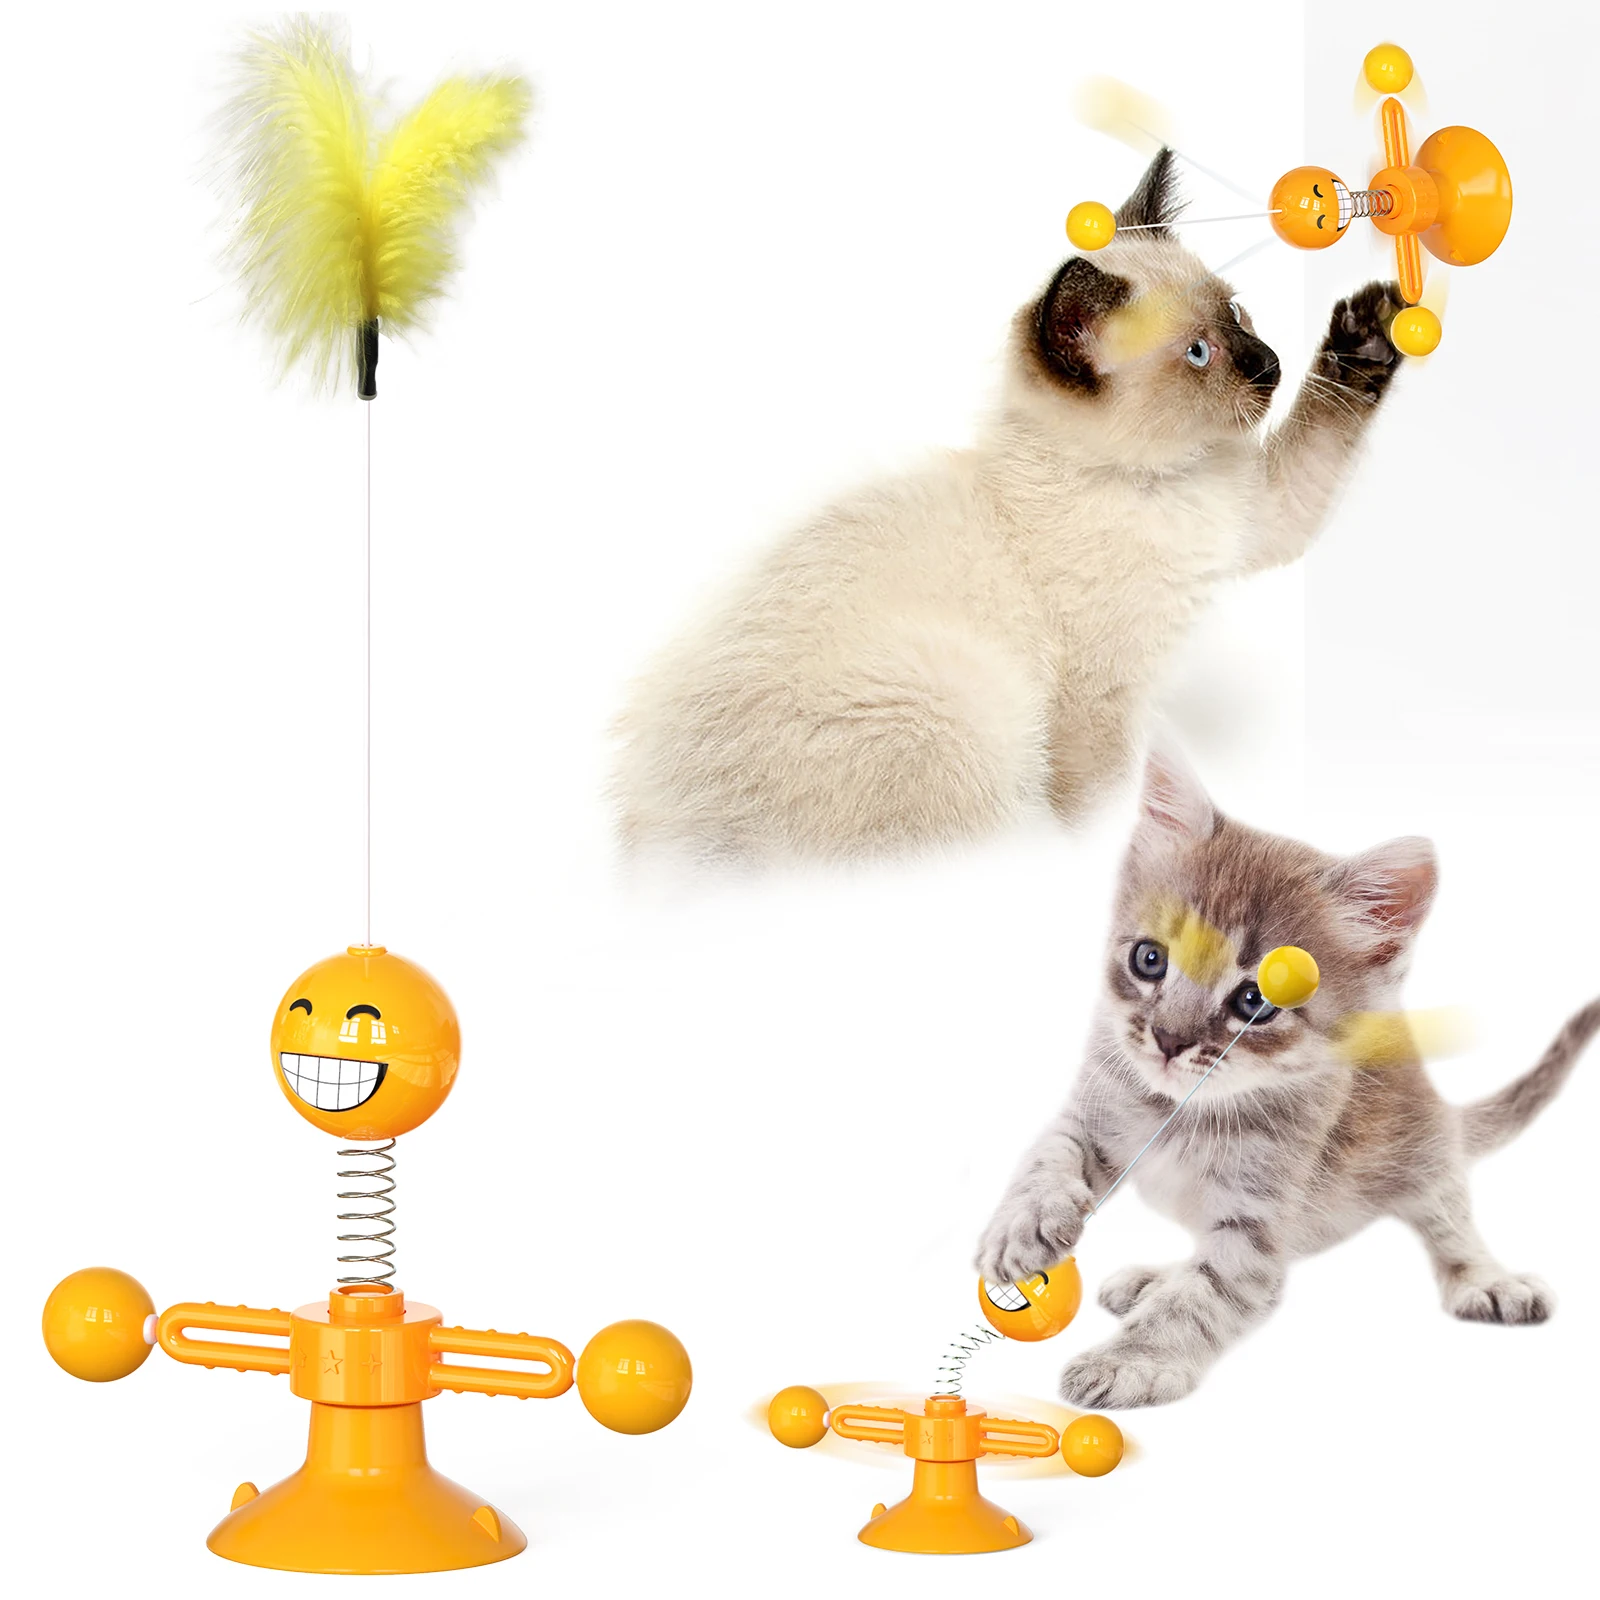 

Midepet Wholesale Pet Suppliers Windmill Teasing Interactive Toy Cat Toy Turntable Training With Catnip Feather Toys, Light blue,yellow,light green